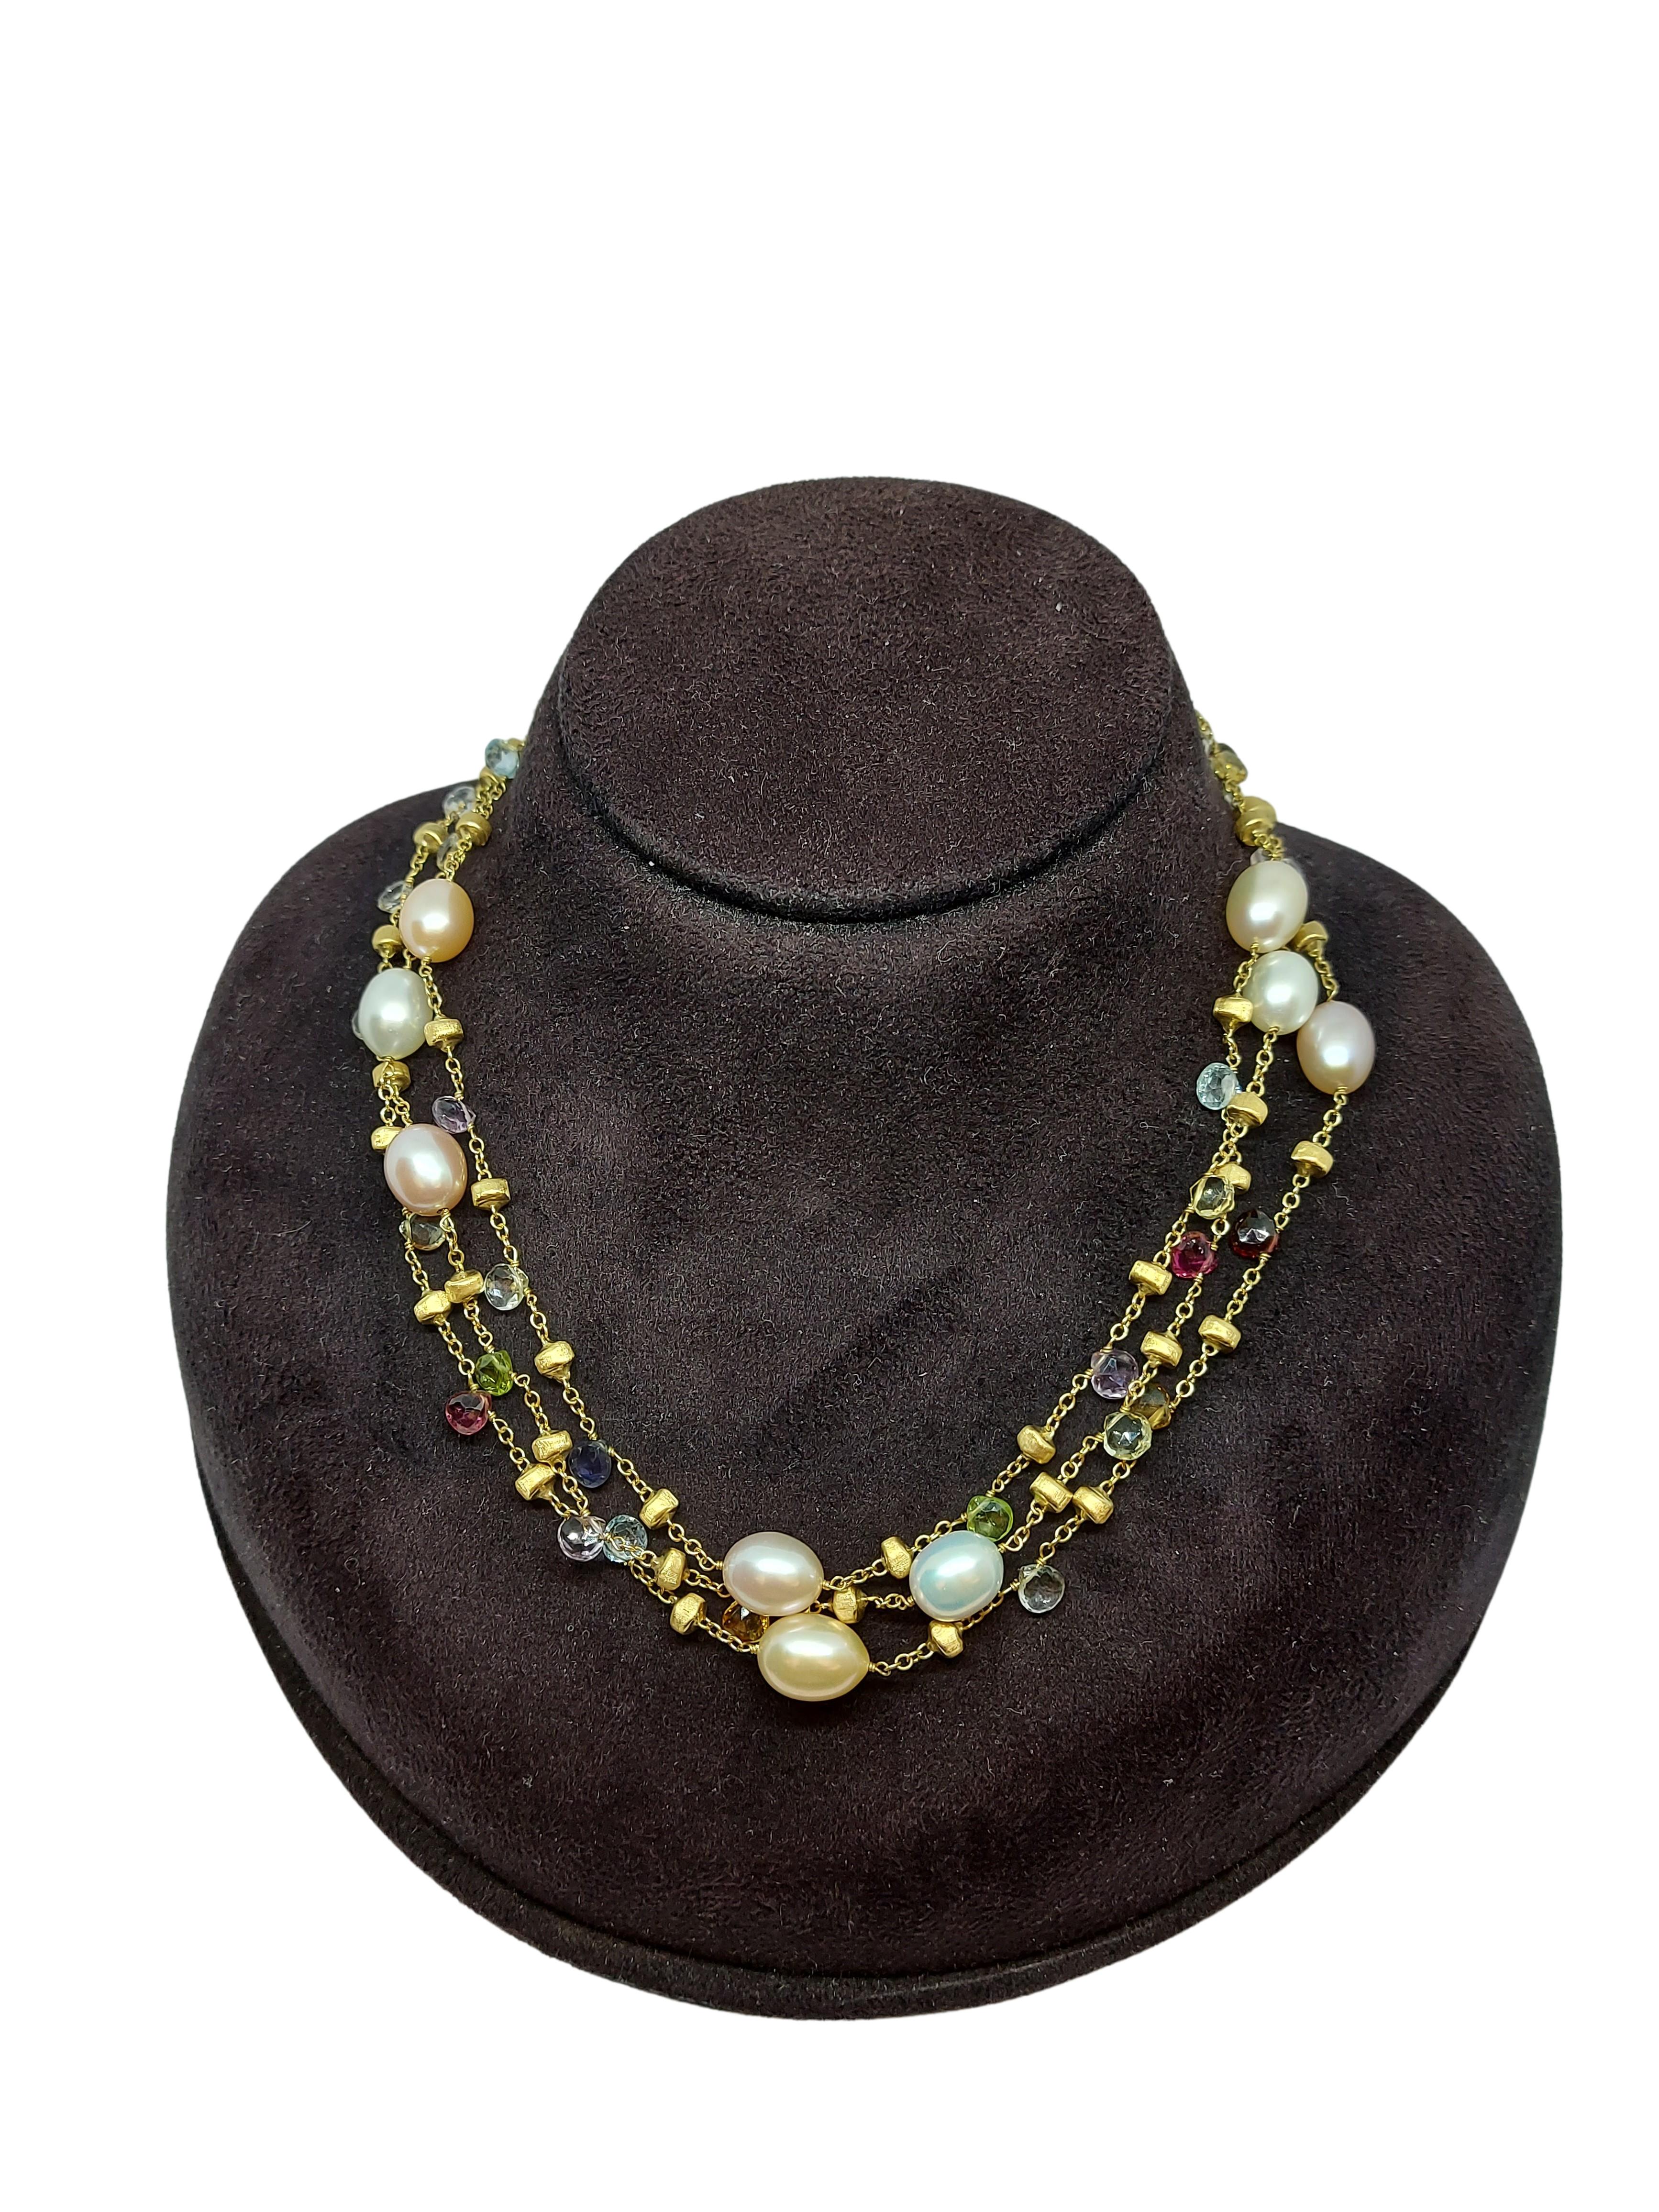 18kt Gold Marco Bicego Long Necklace, Paradise Collection, Pearls & Gemstones 1